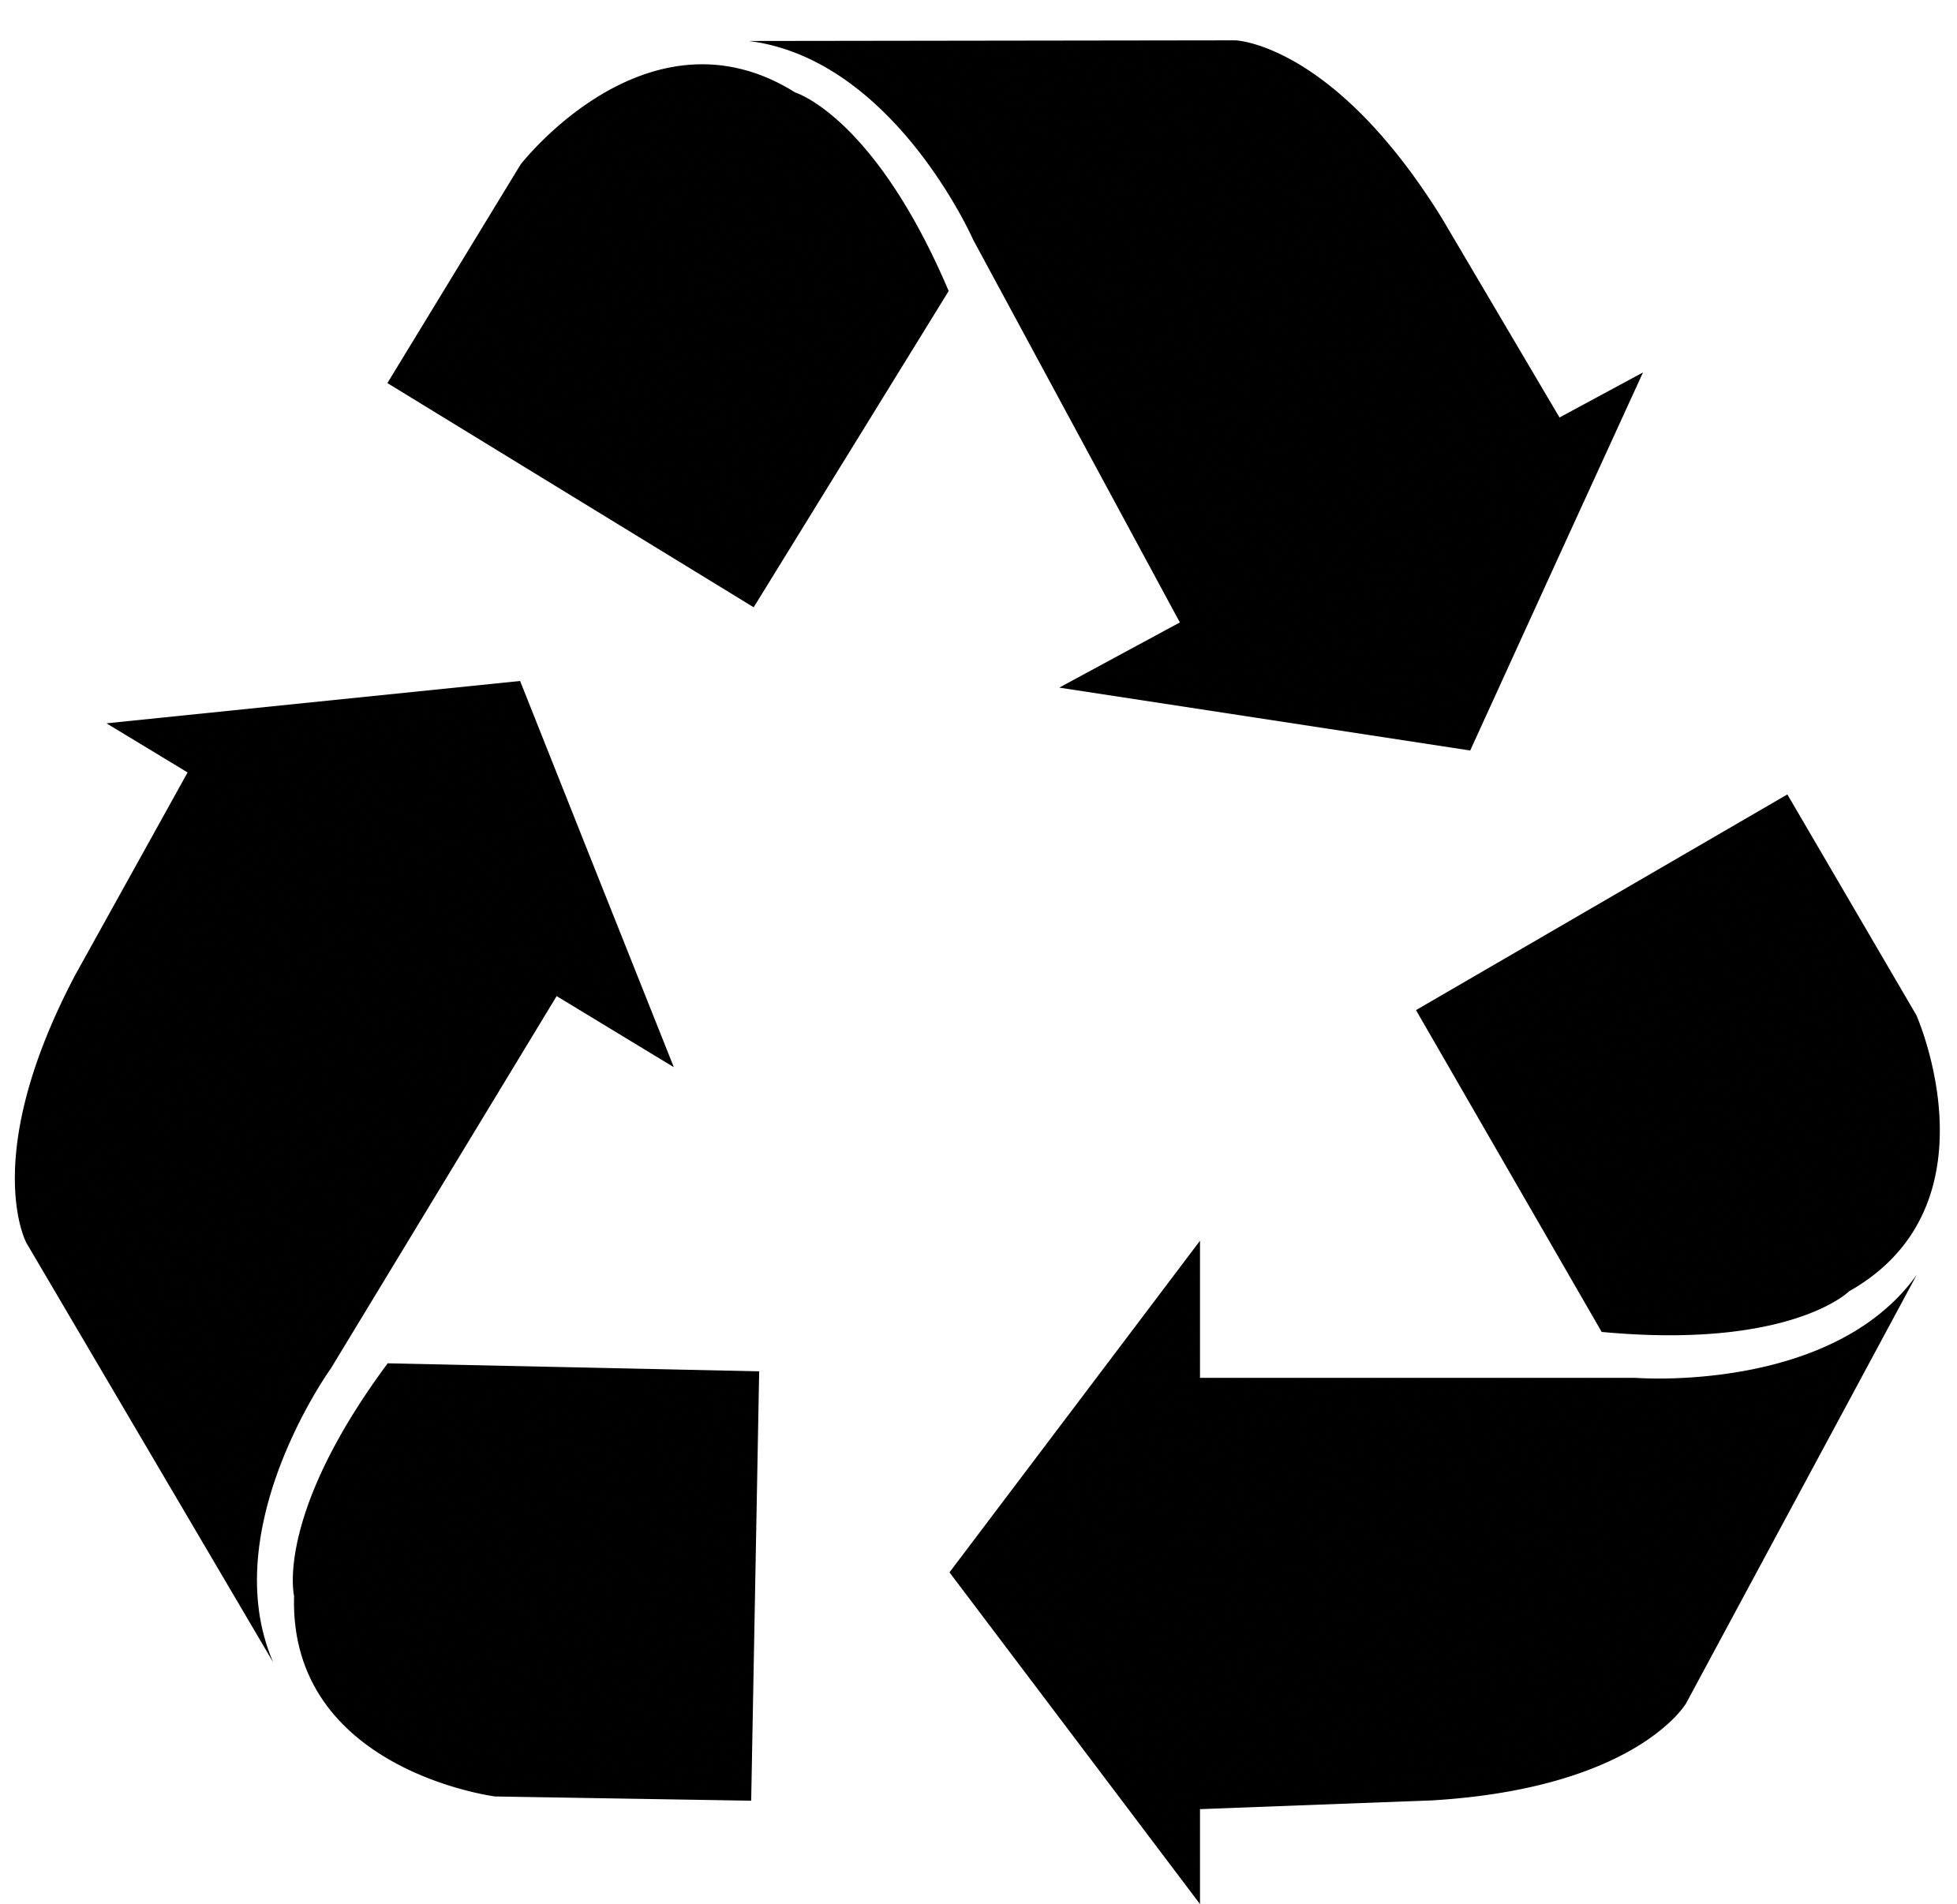 Please Recycle Logo - Free Recycling Sign, Download Free Clip Art, Free Clip Art on ...